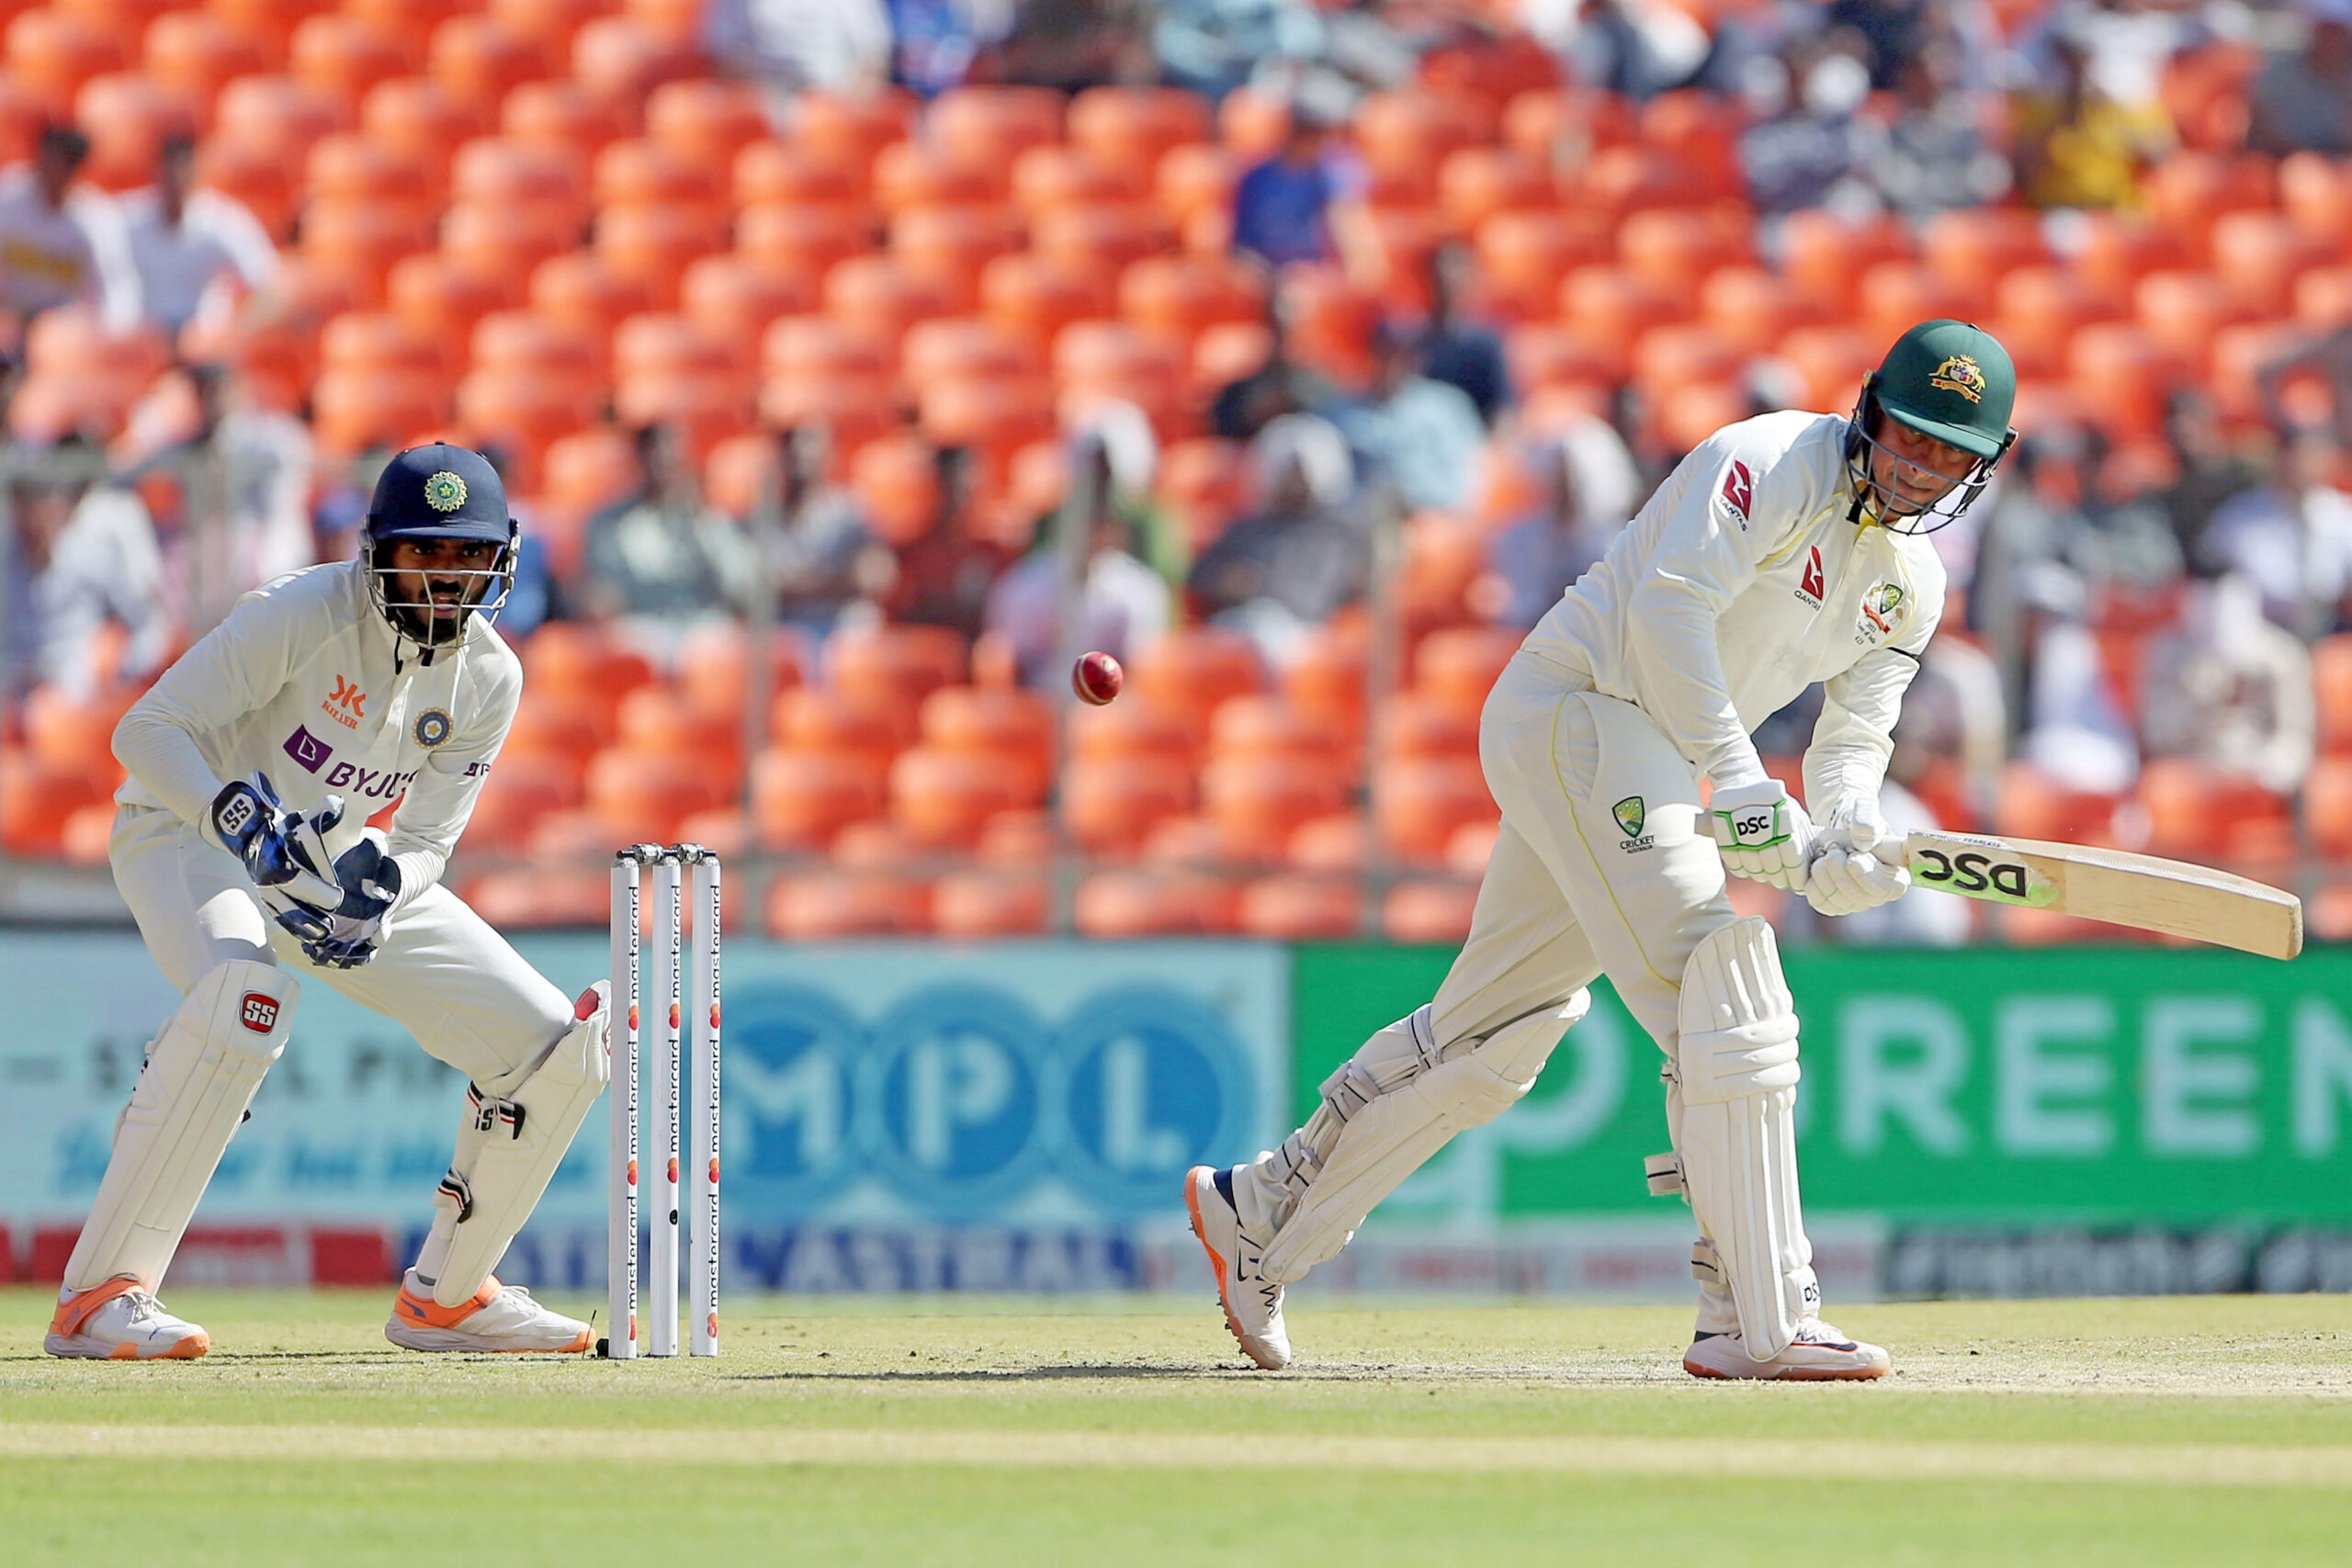 Khawaja-Green take team past 300 in 4th Test, Hosts struggle for wickets in the match